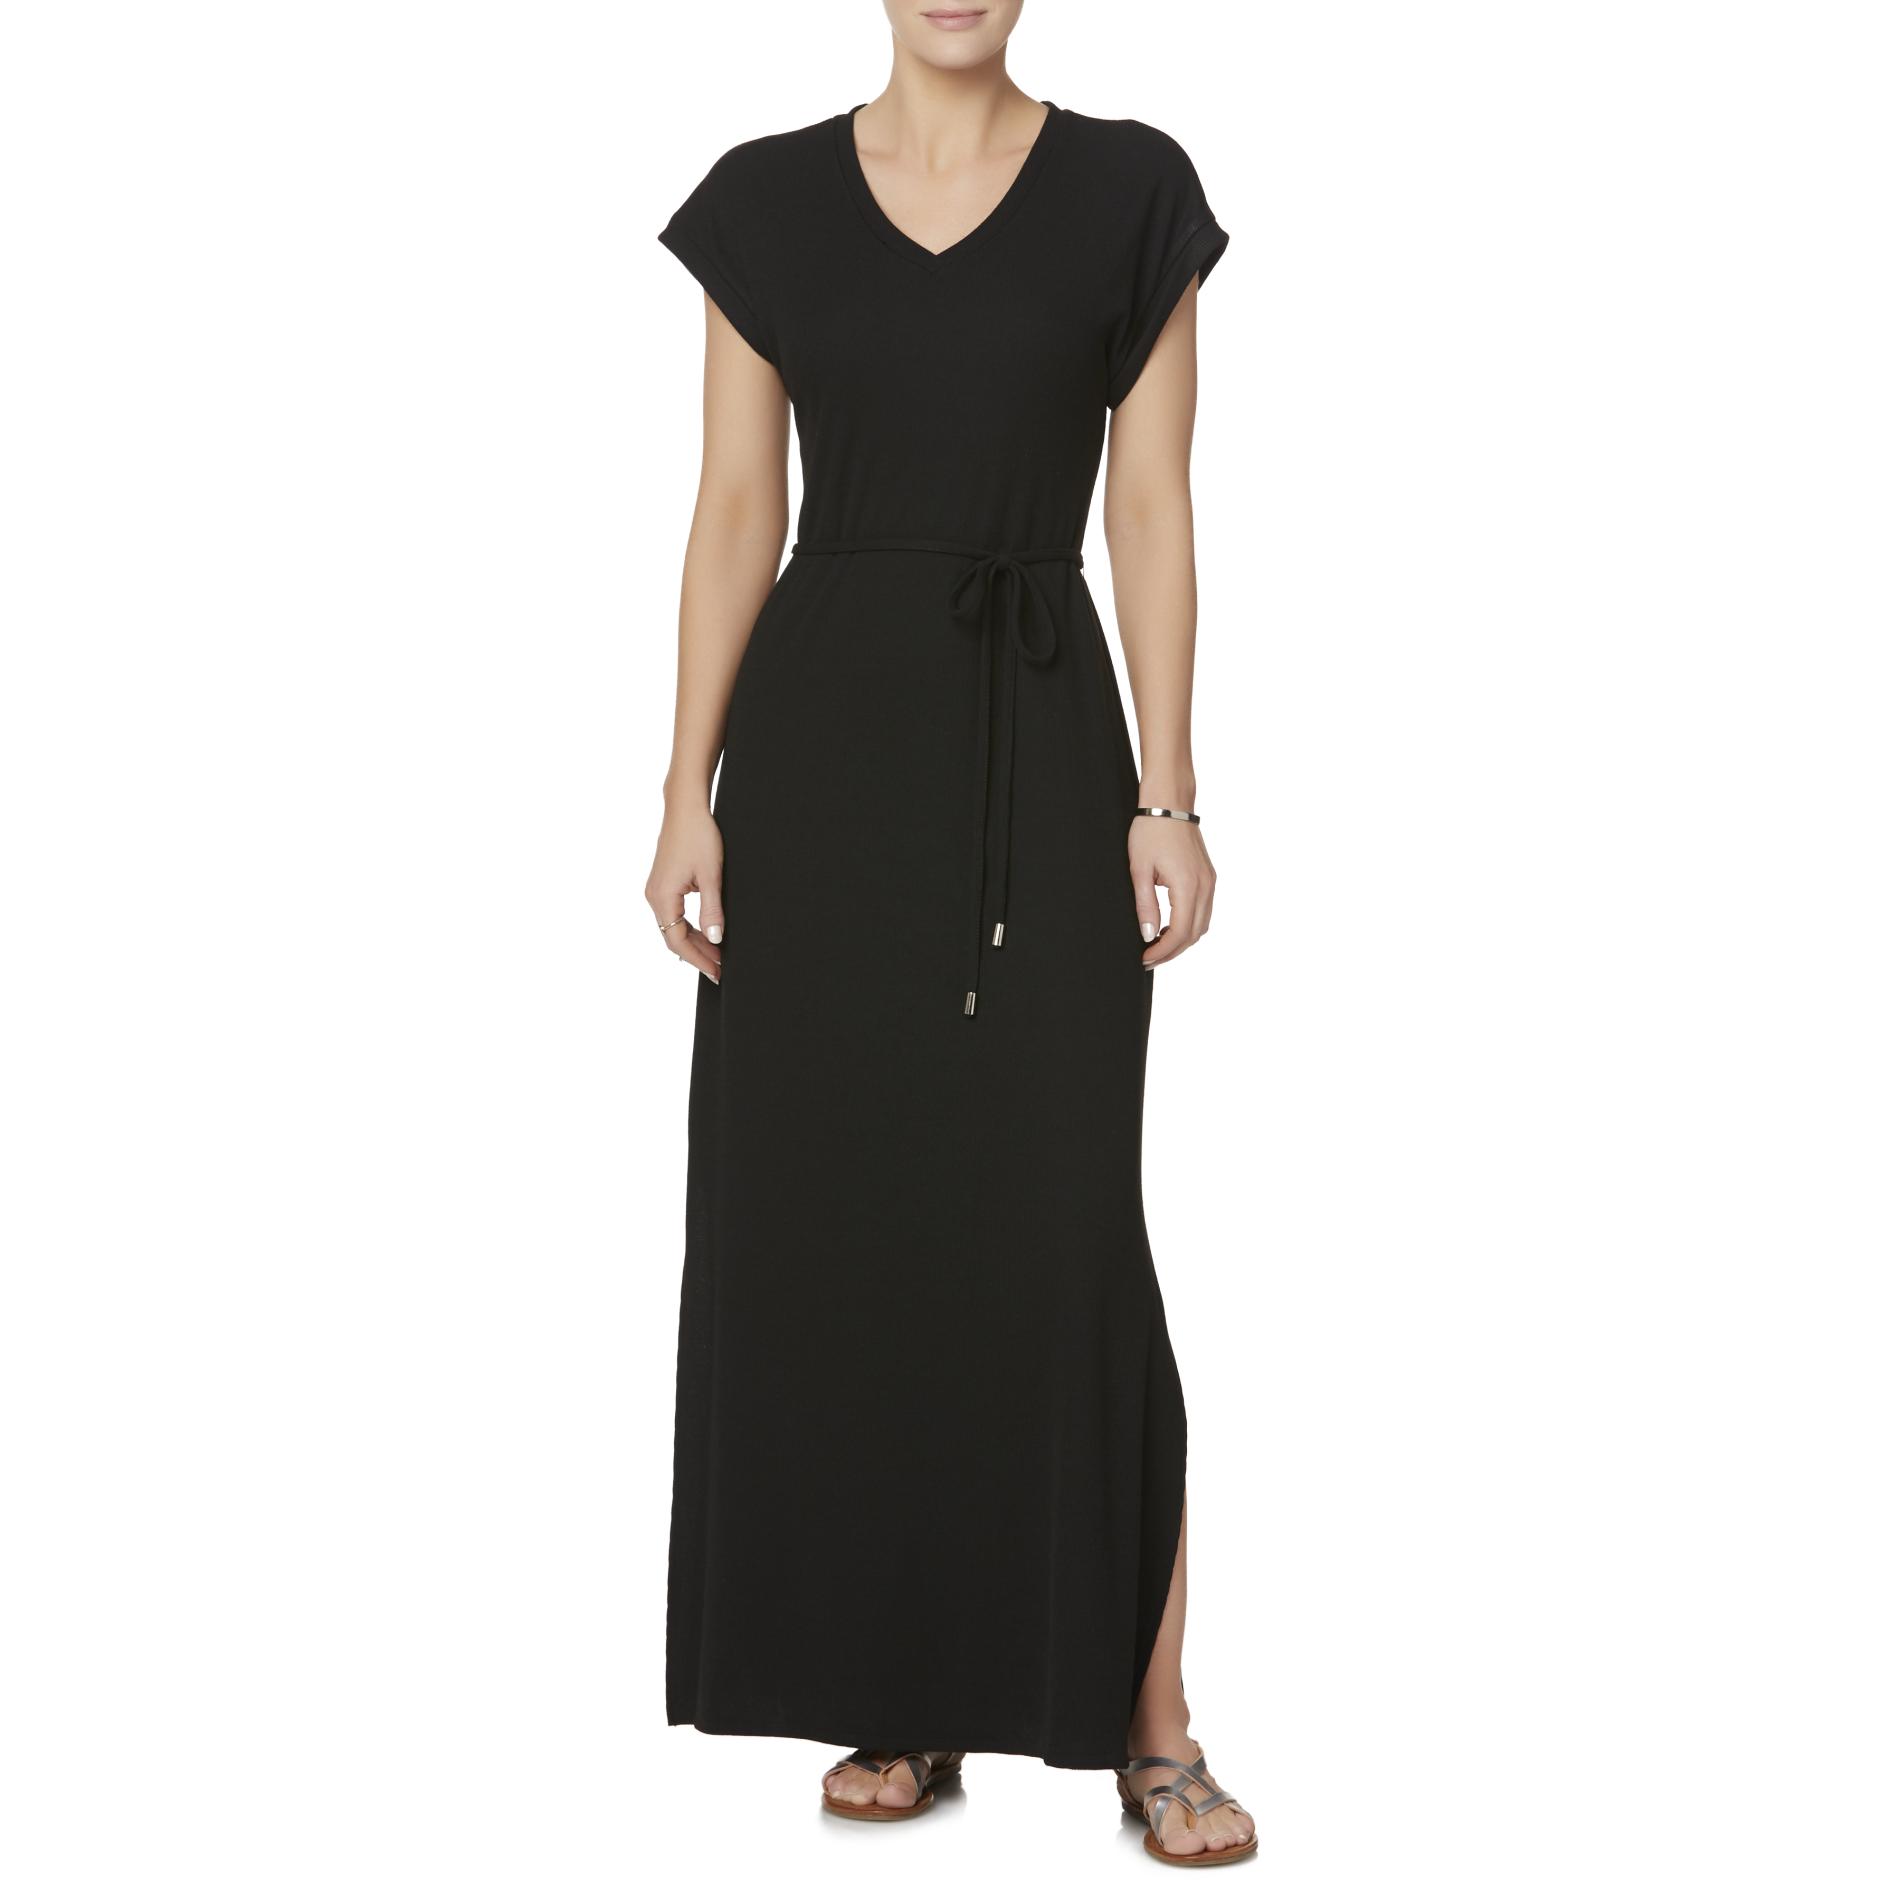 Simply Styled Women's Maxi Dress